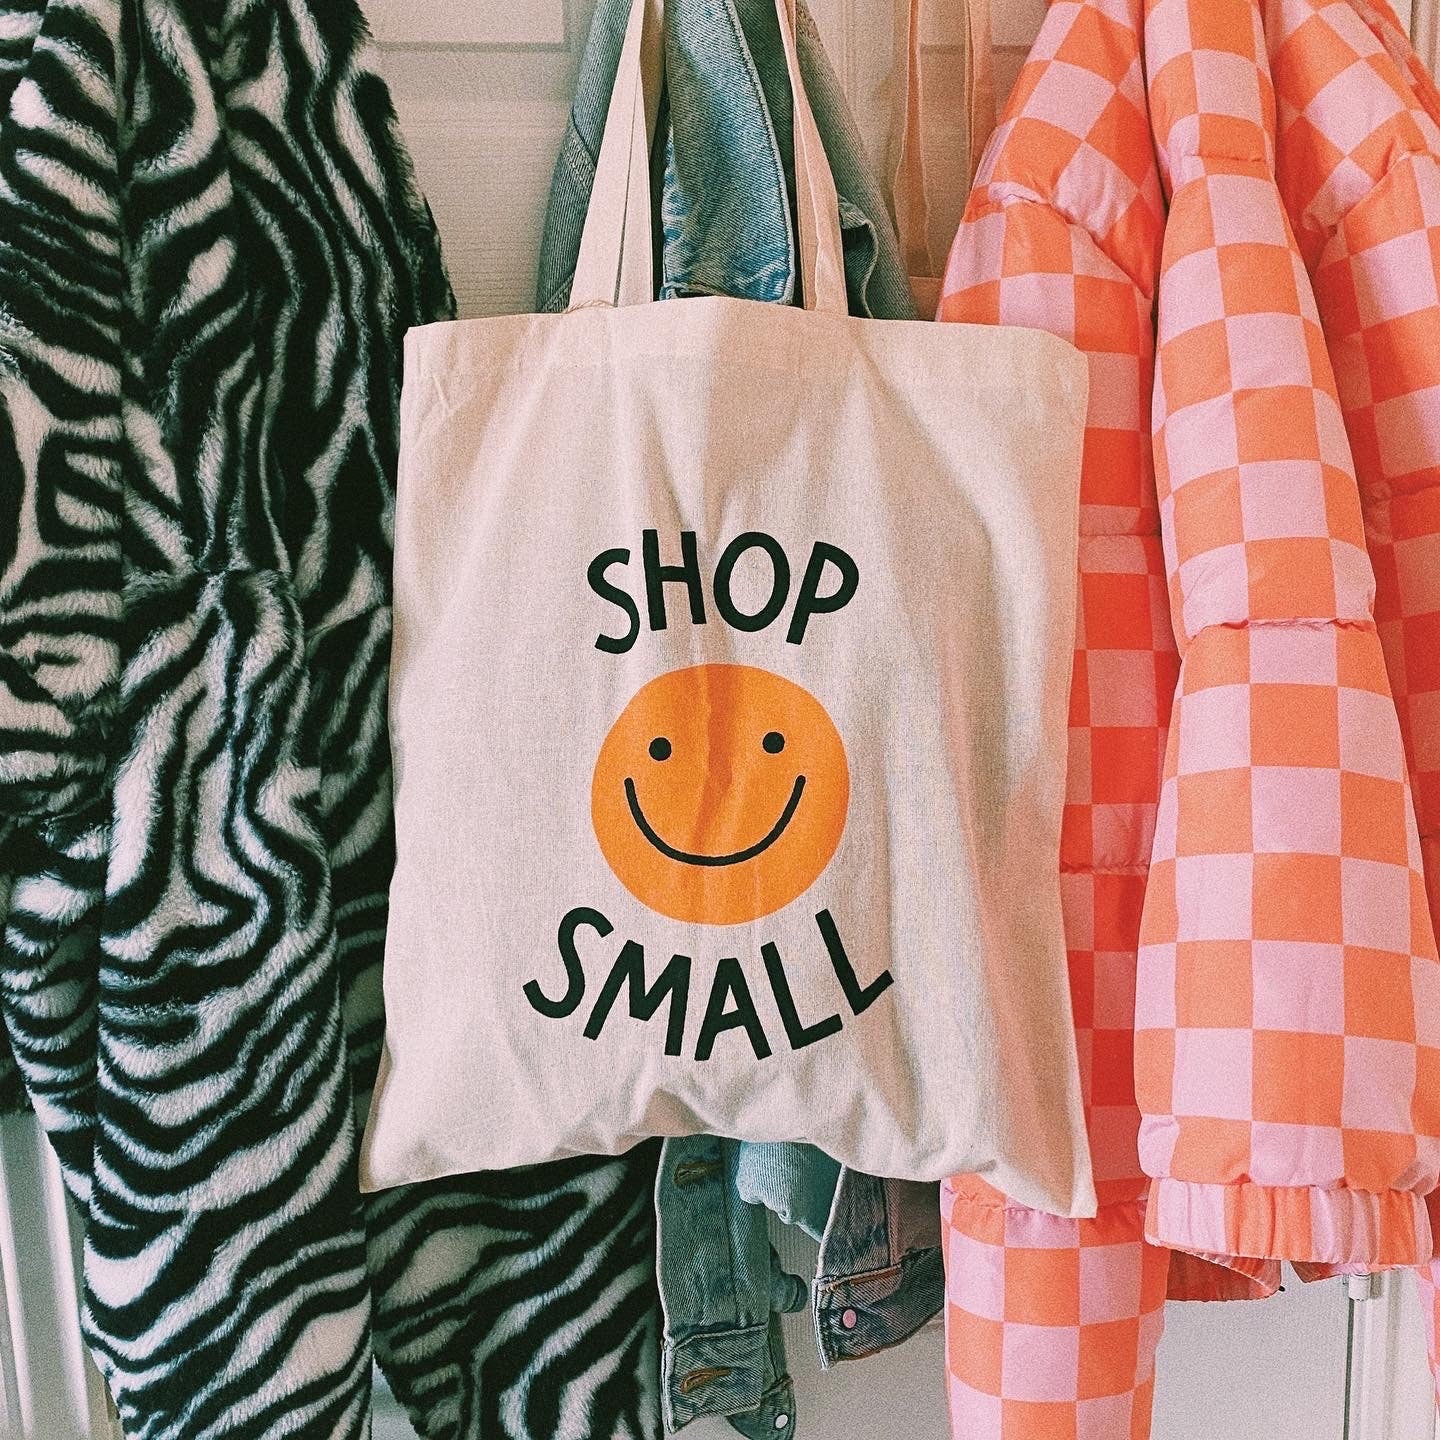 Shop Small Screen Printed 100% Cotton Tote Bag | Water-Based Inks | Eco-Friendly Bag | Small Business Support